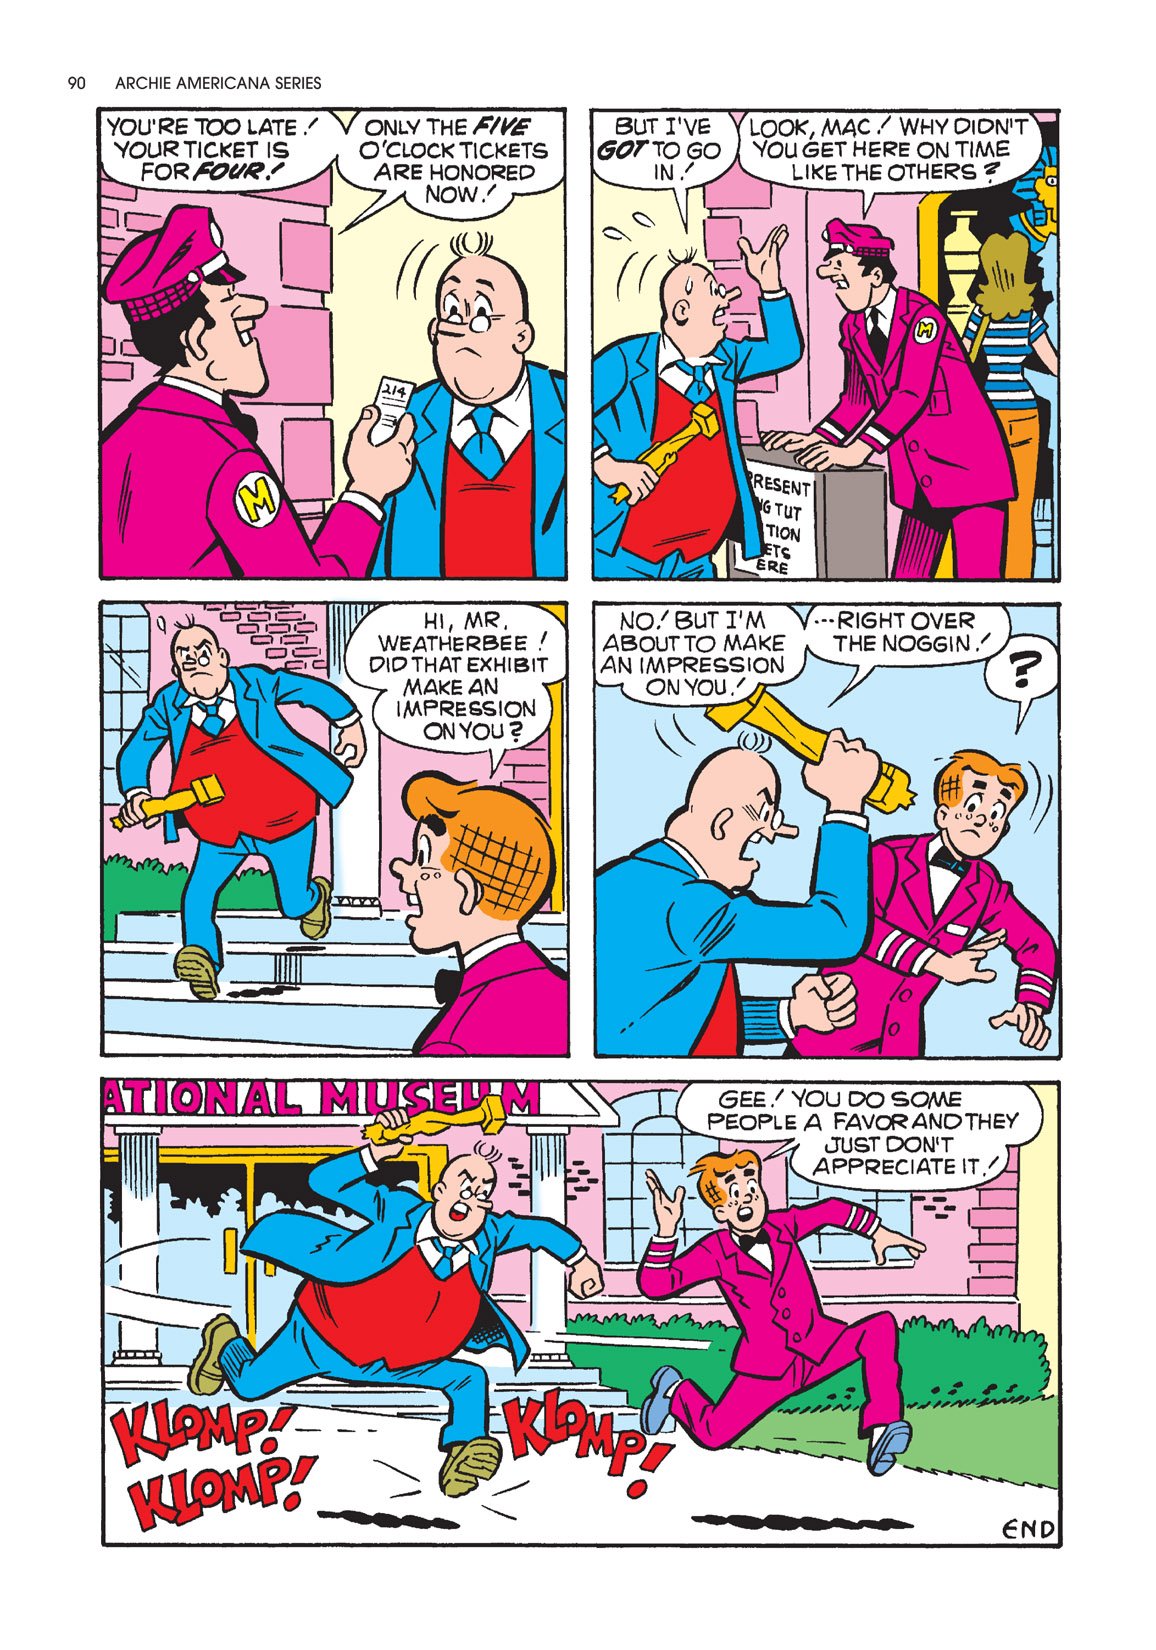 Read online Archie Americana Series comic -  Issue # TPB 10 - 91